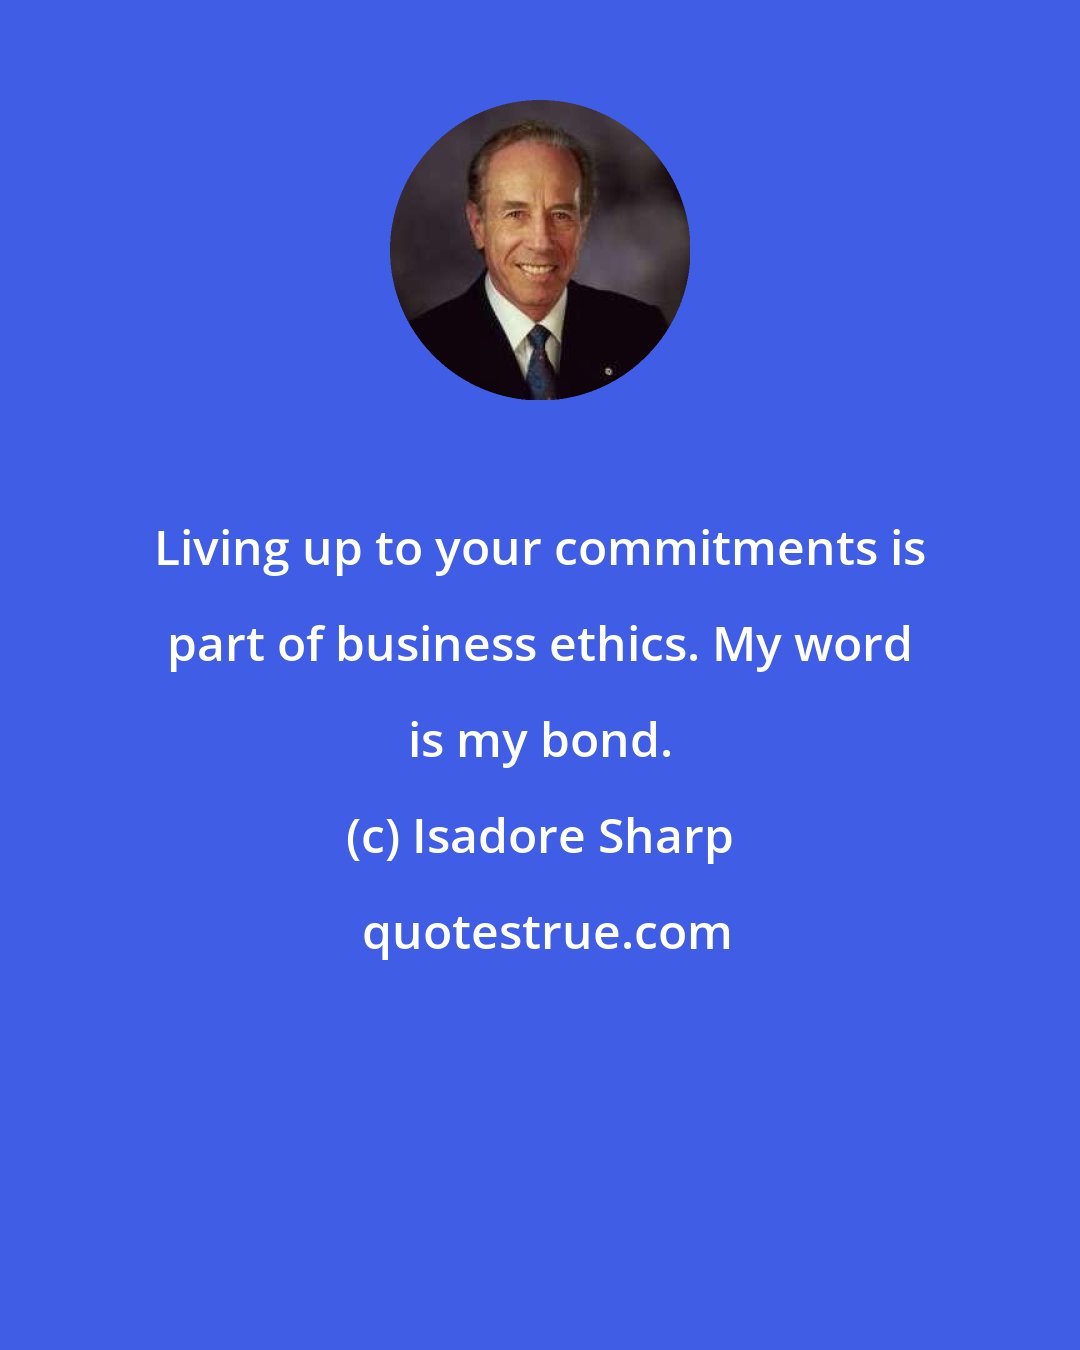 Isadore Sharp: Living up to your commitments is part of business ethics. My word is my bond.